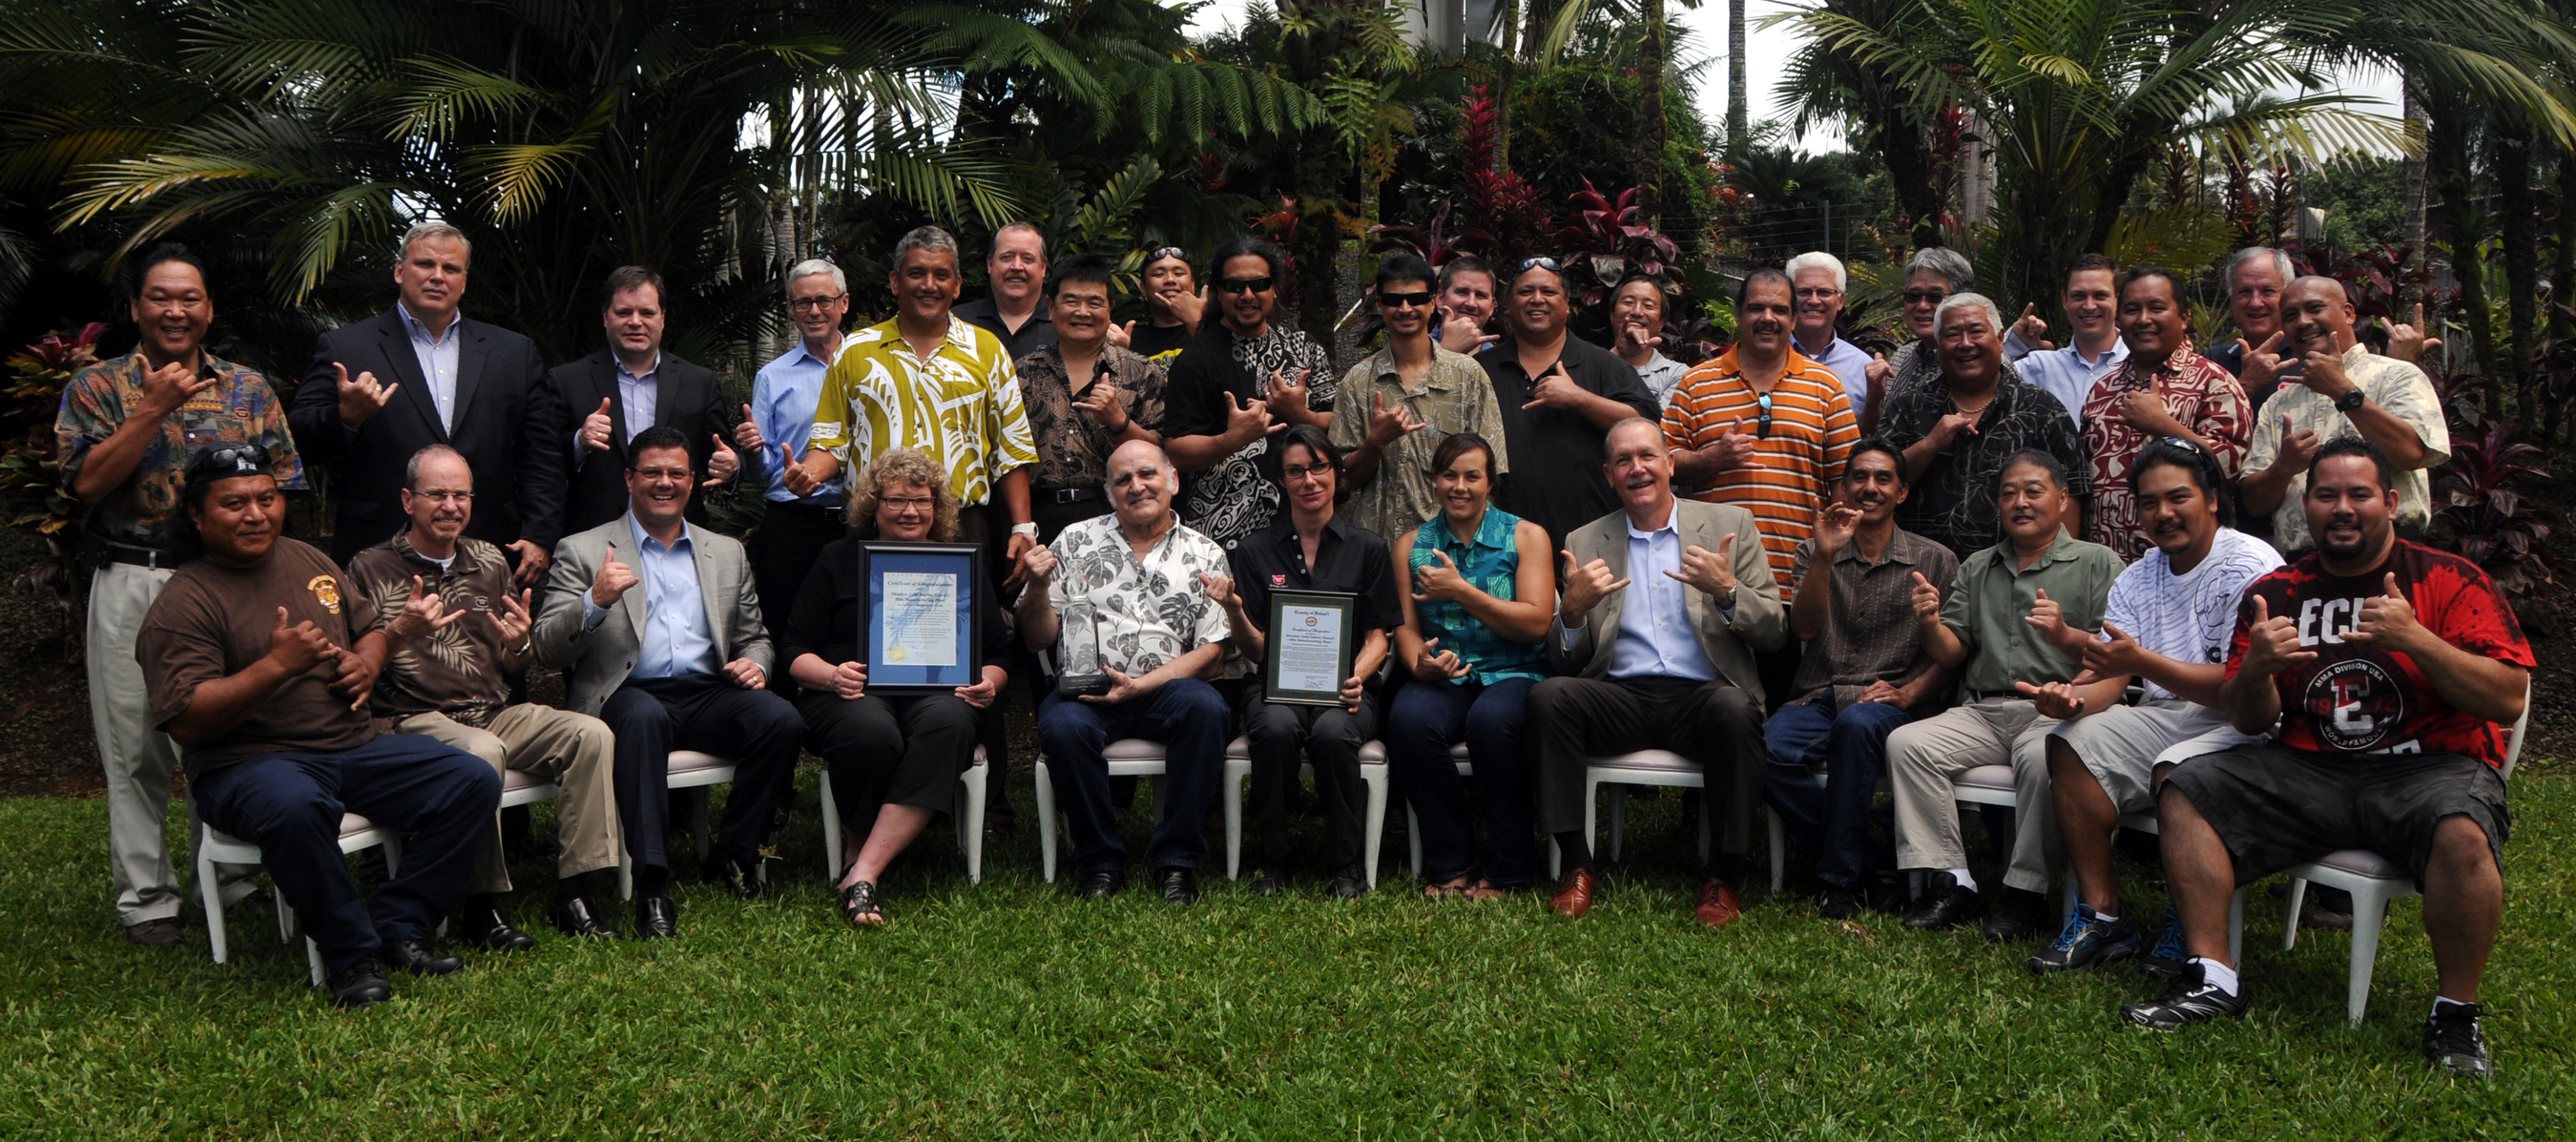 Meadow Gold Dairies Hawai'i Hilo Plant Takes Top Prize in Dean Foods National Quality Contest. (PRNewsFoto/Dean Foods Company)